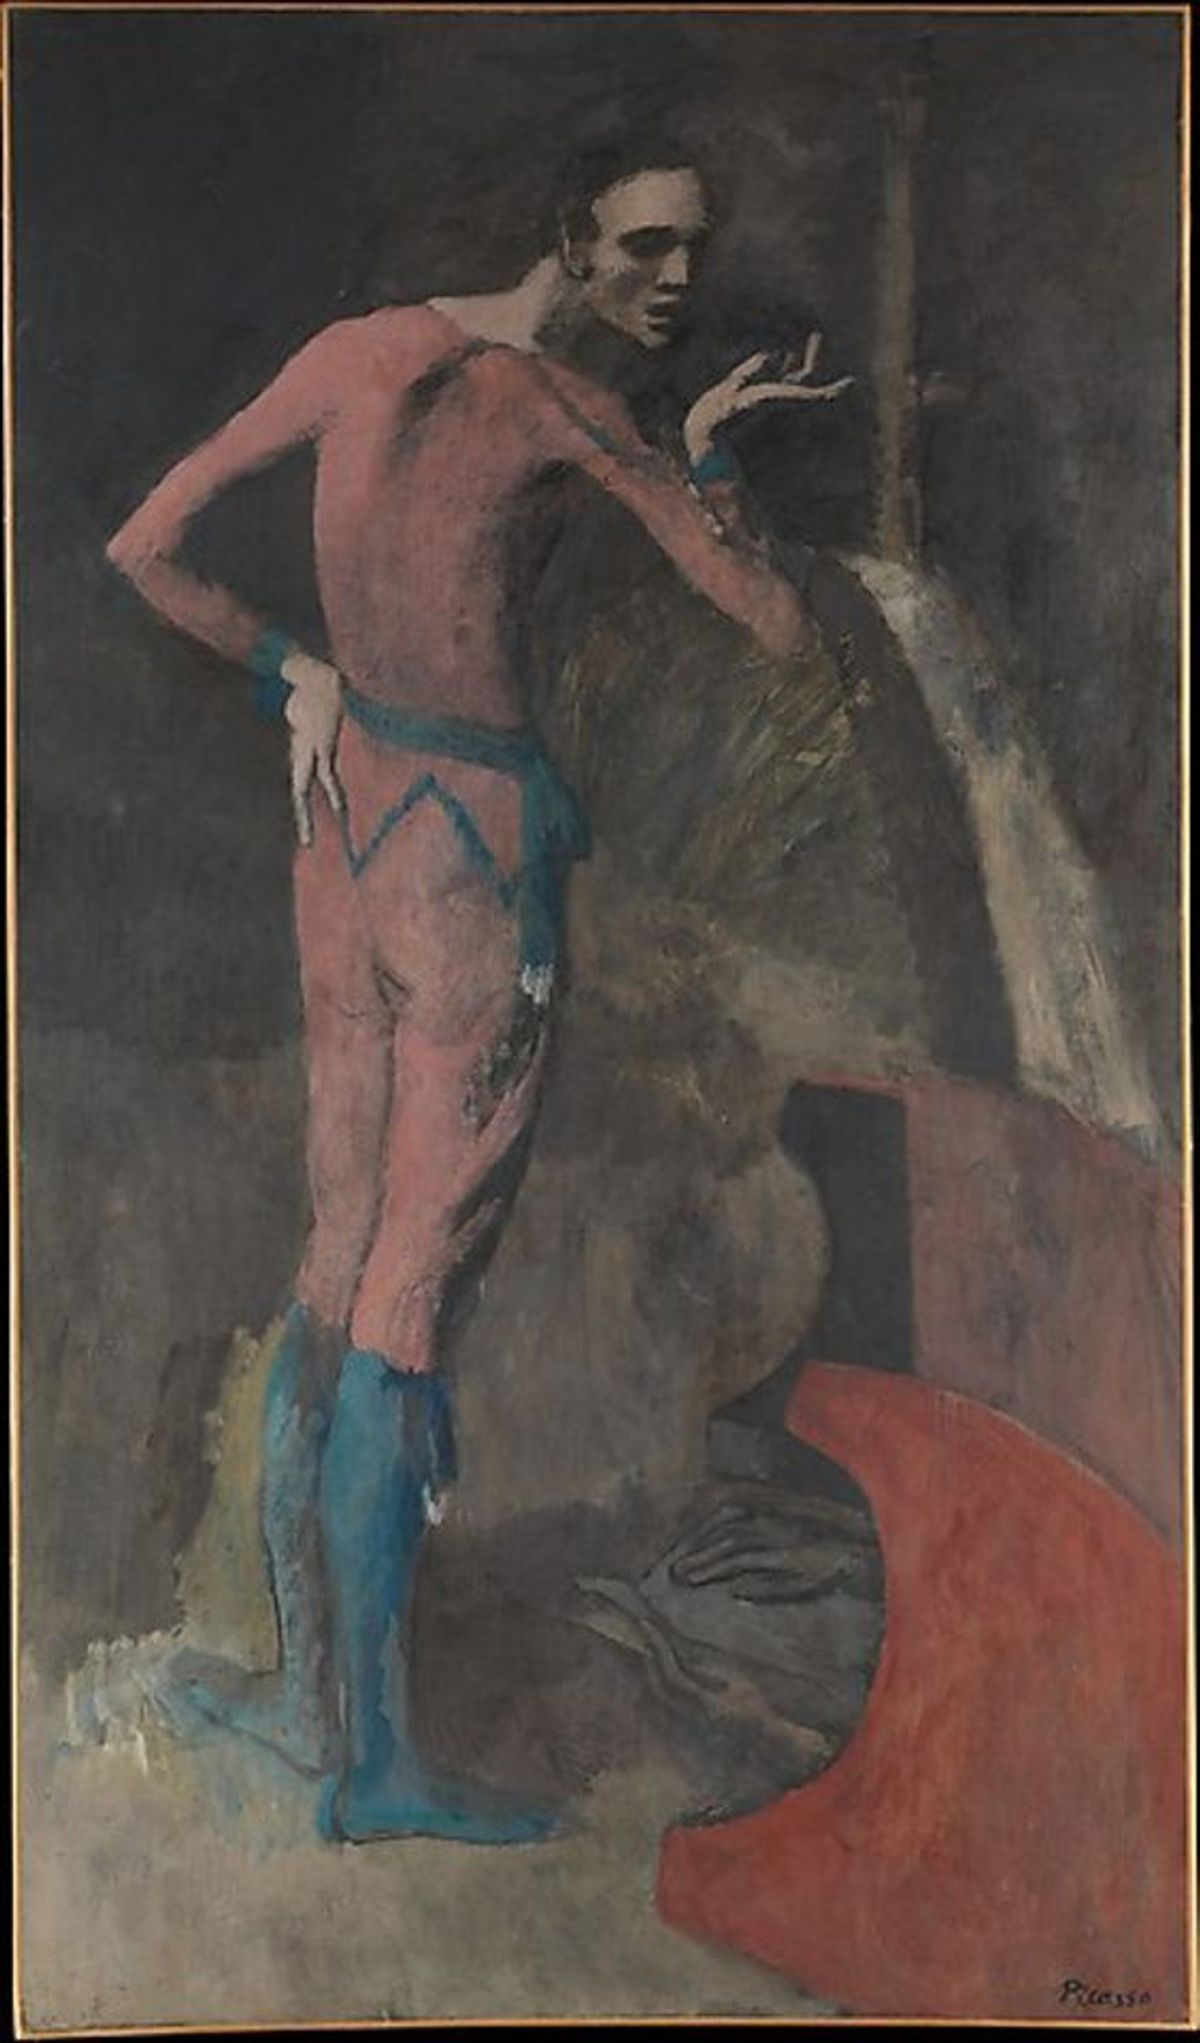 Pablo Picasso's The Actor (1904-05) now hangs in the Metropolitan Museum of Art Photo: Estate of Pablo Picasso / Artists Rights Society (ARS), New York